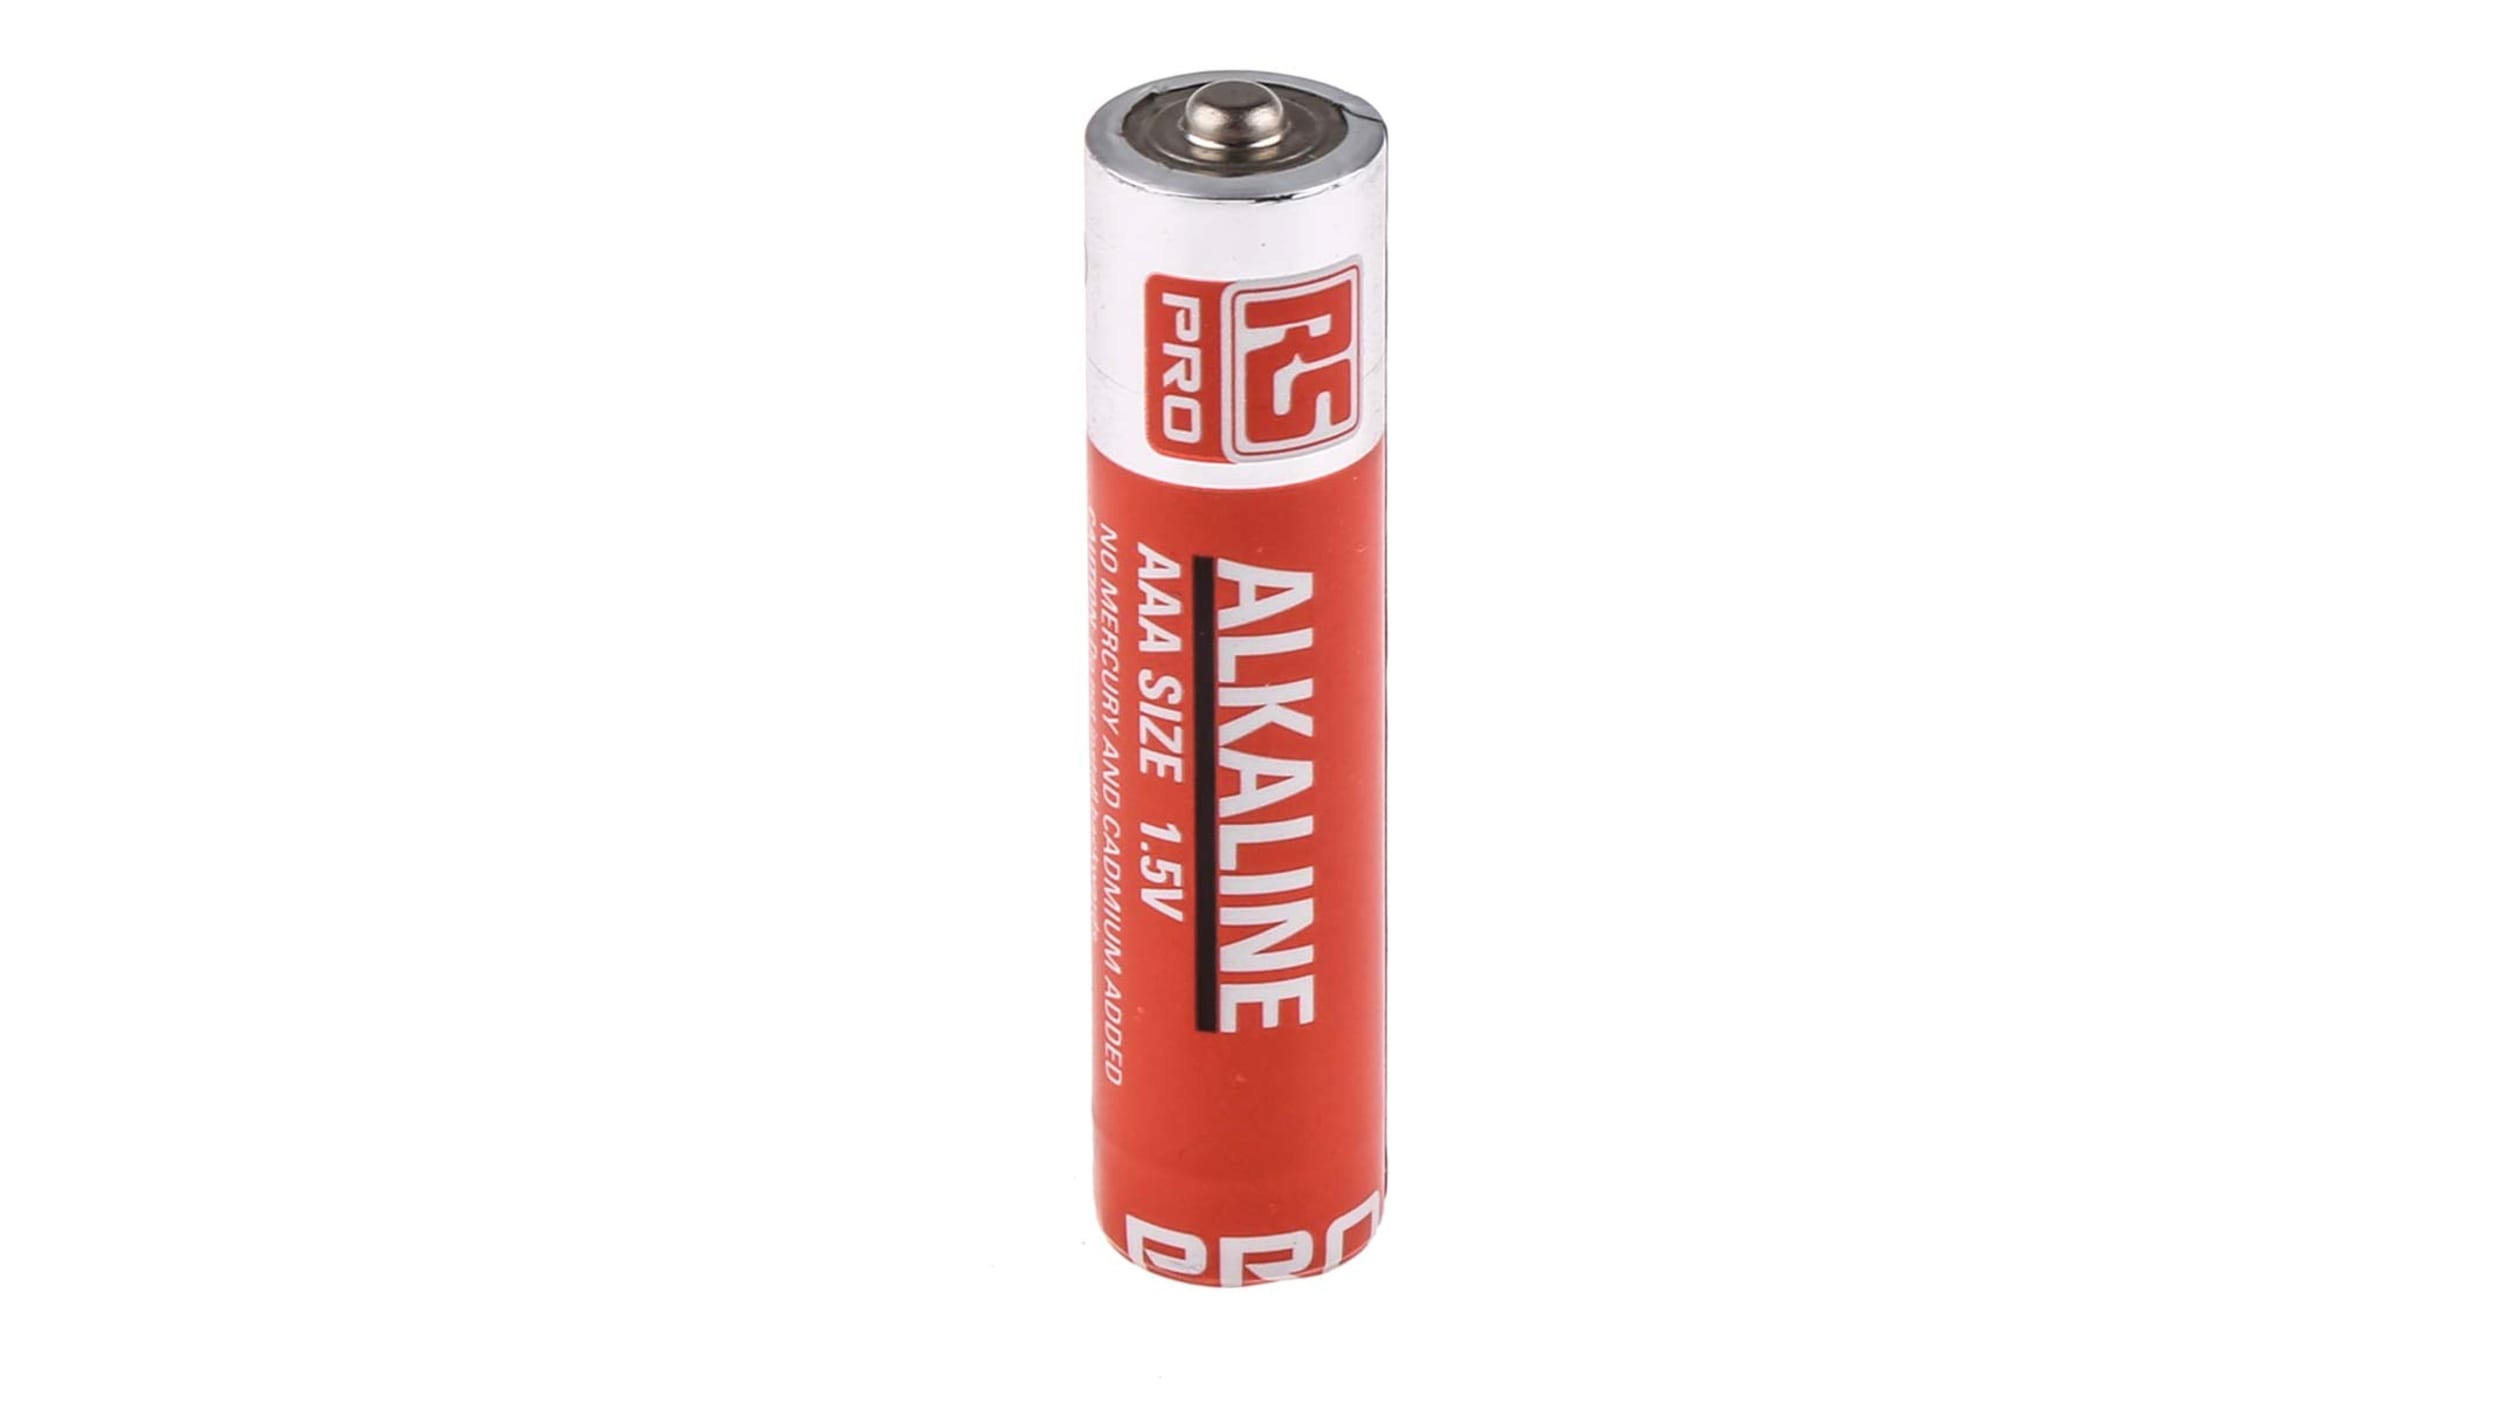 AAA Batteries - Size, Chemistry Types and Replacements